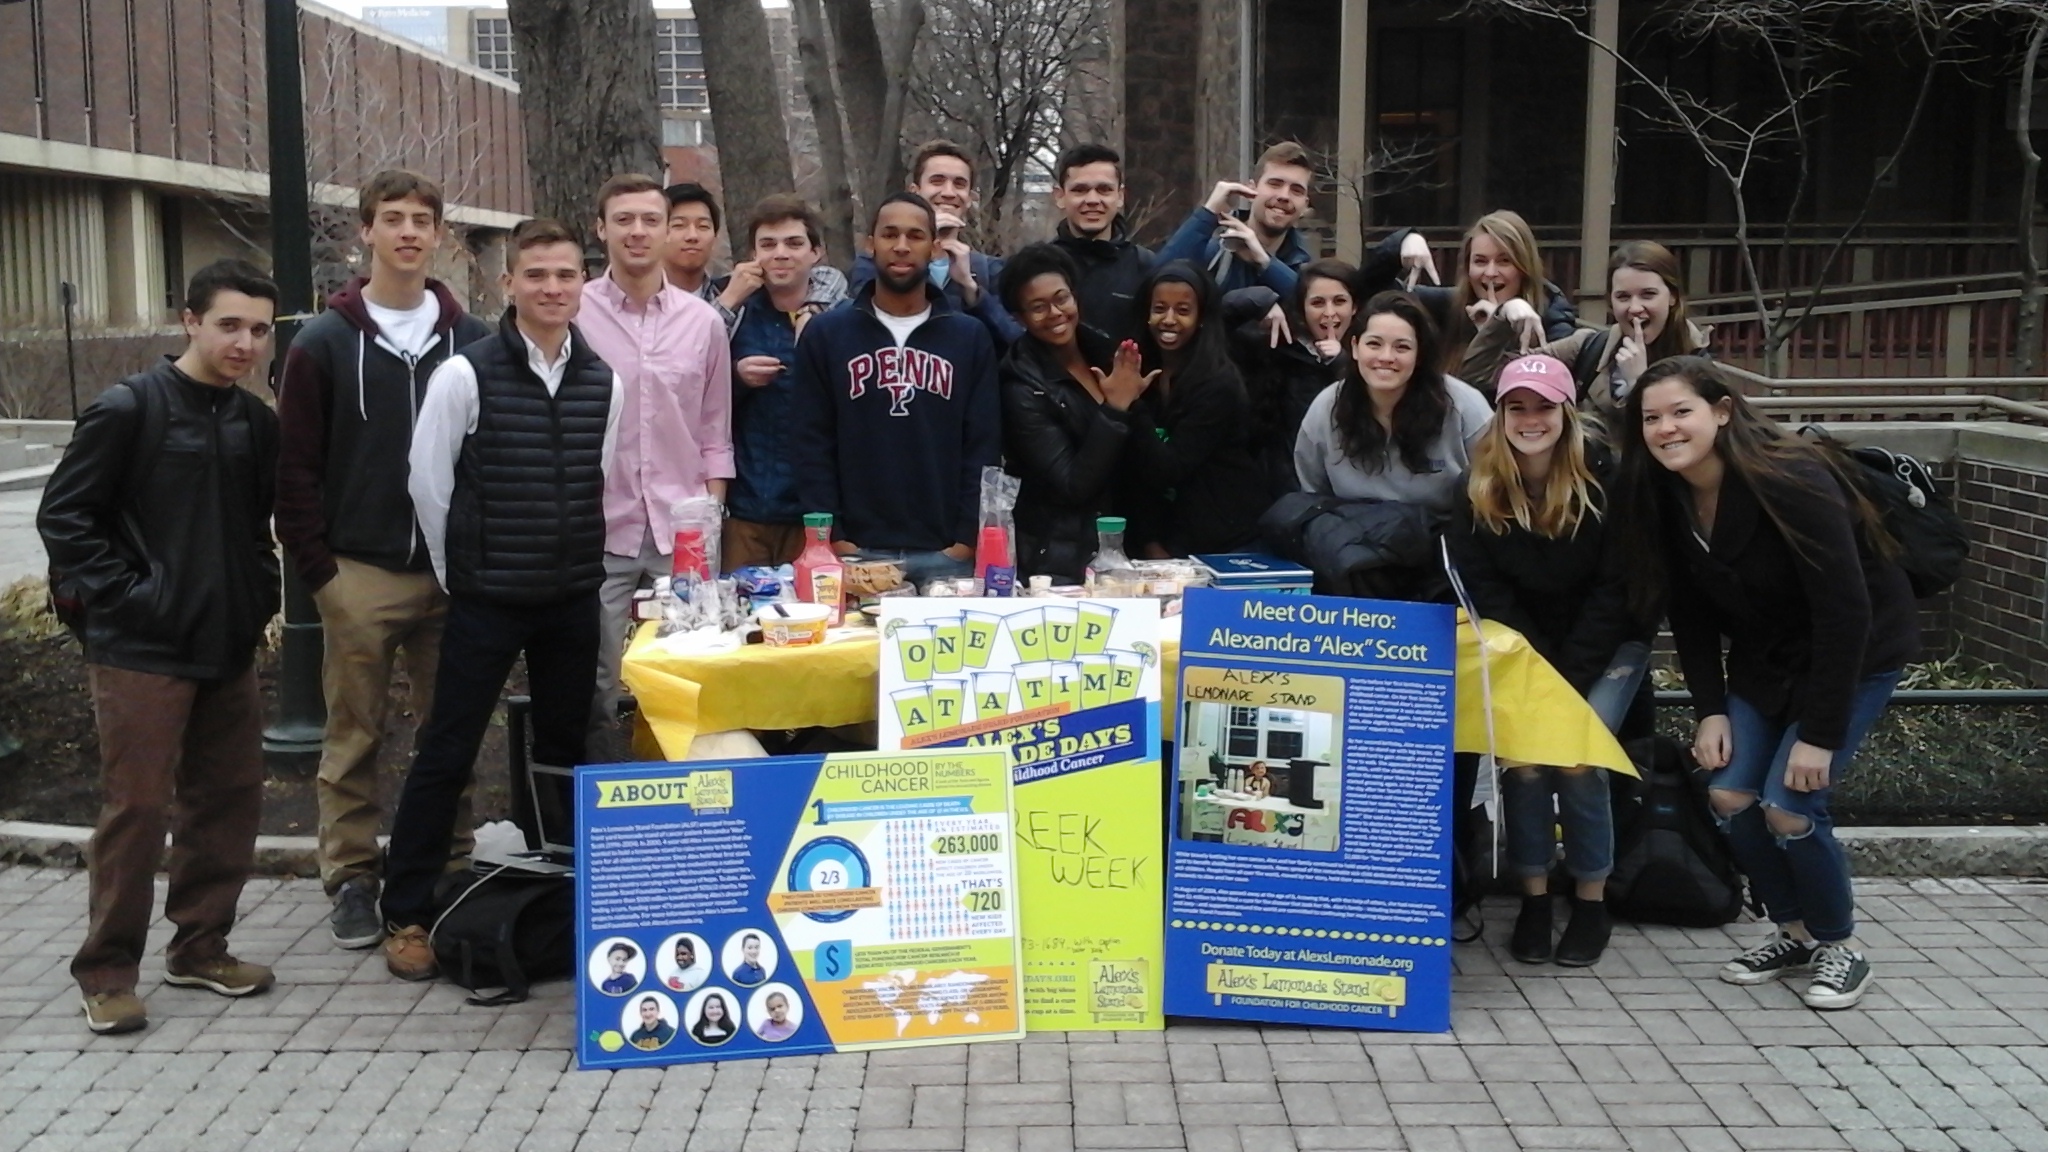 Greek life supporting childhood cancer research at a lemonade stand